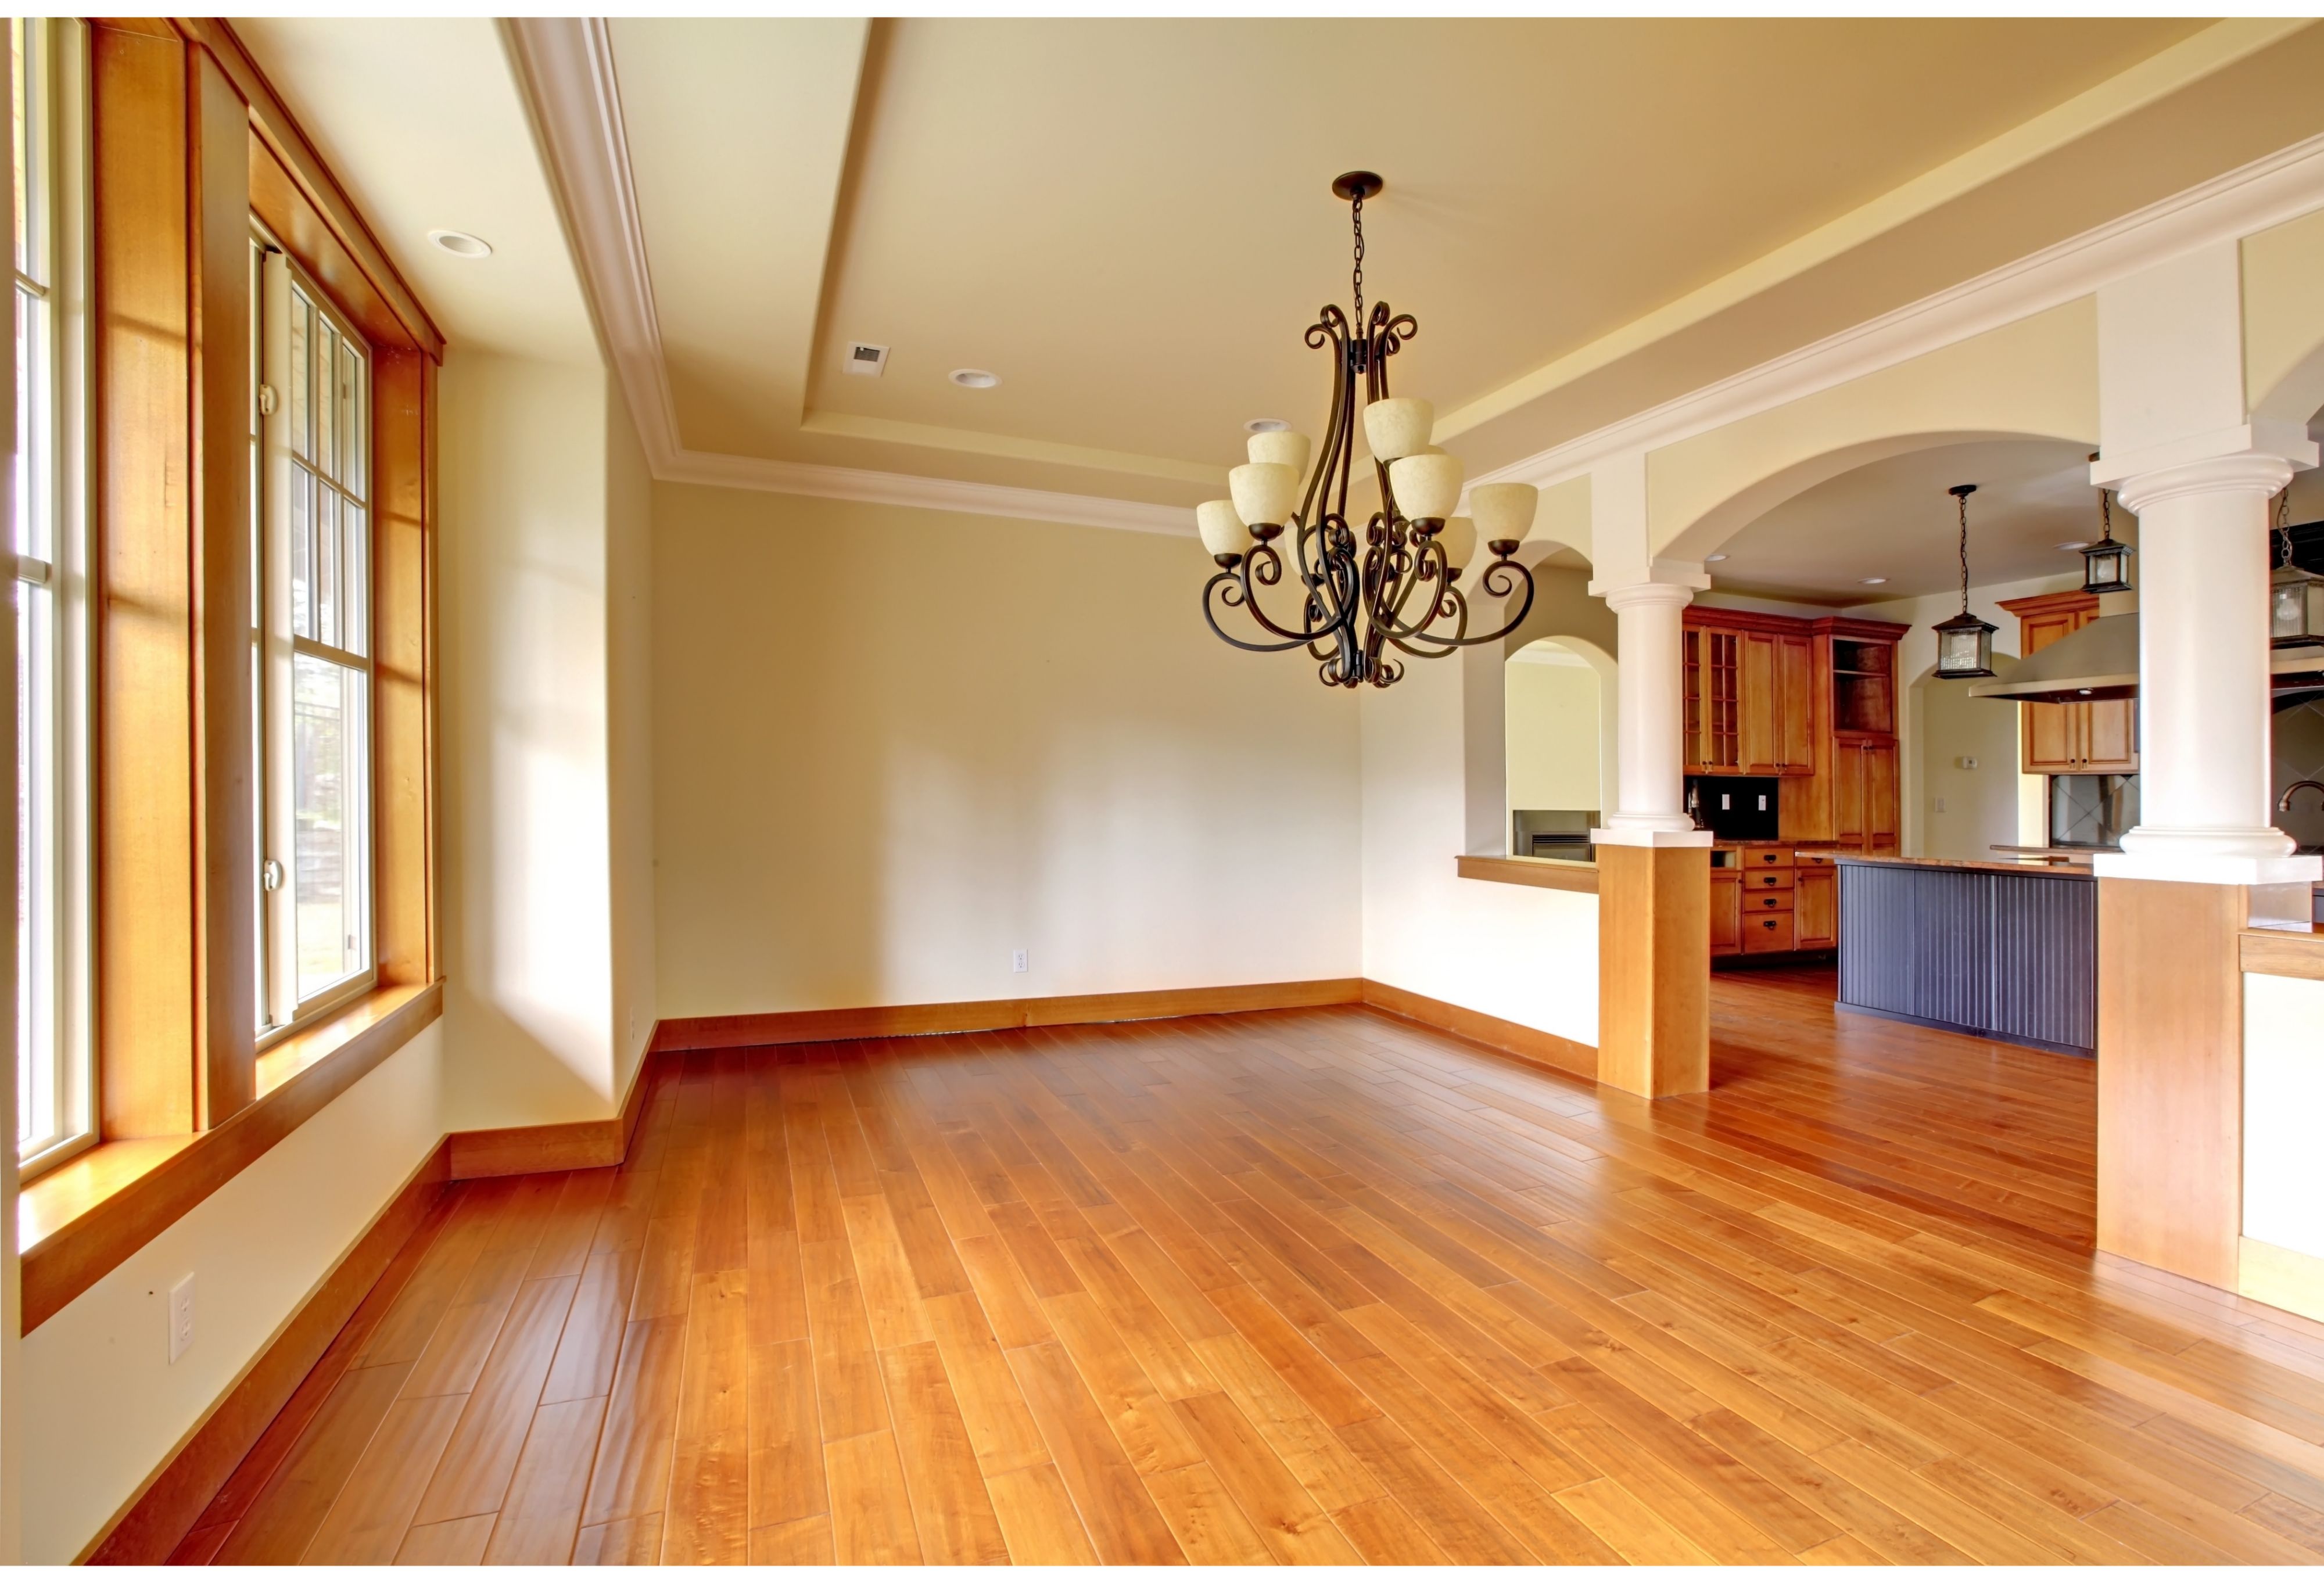 The Importance of Using a Hardwood Flooring in South Bay